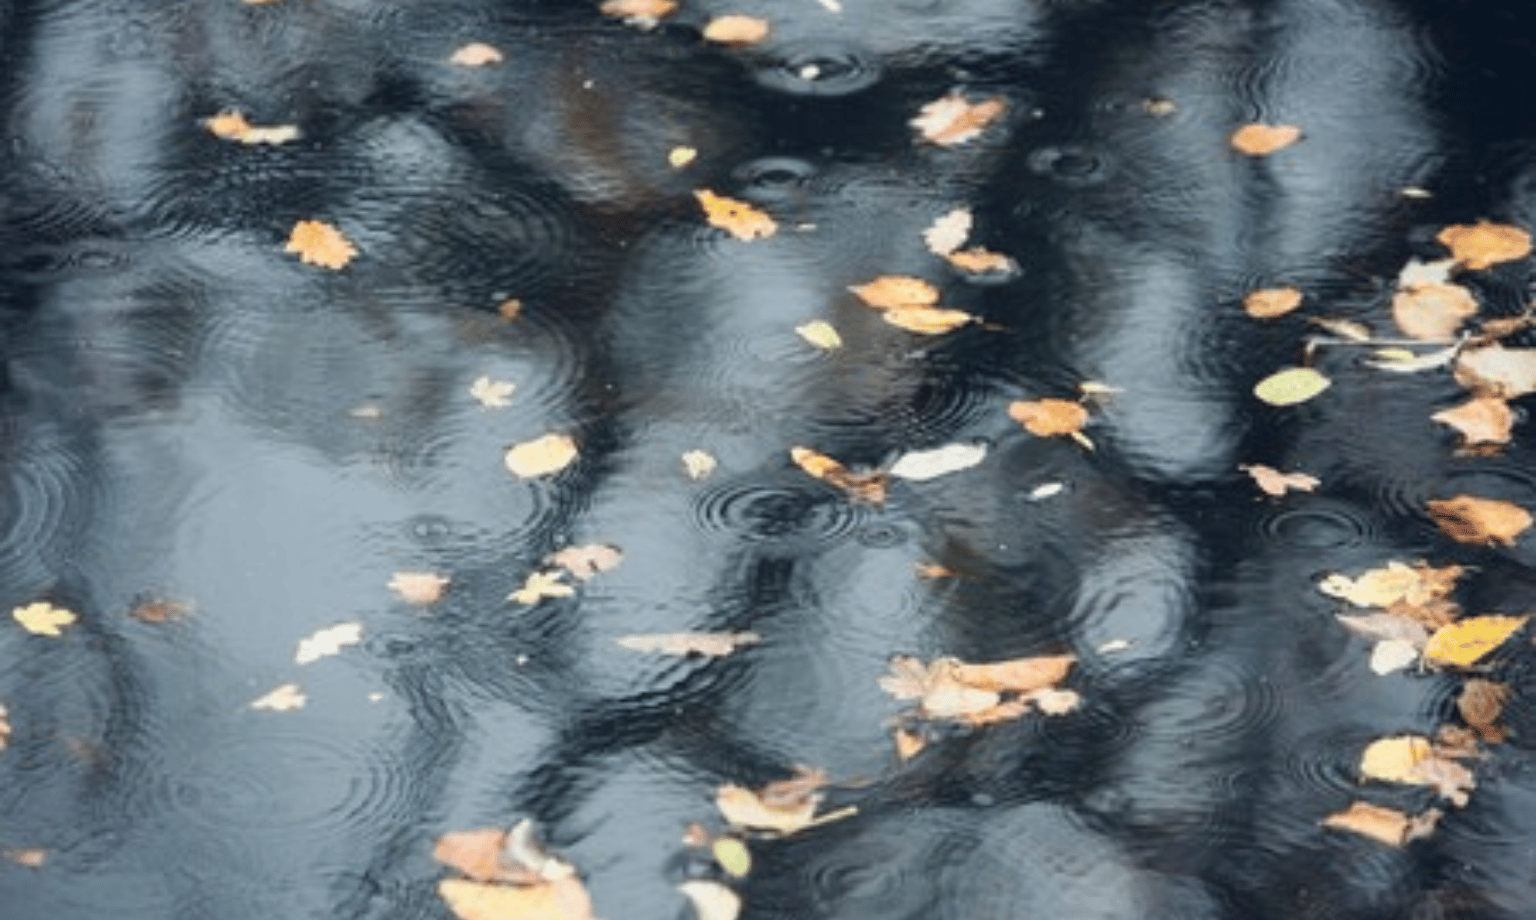 Big Autumn leaves floating on water